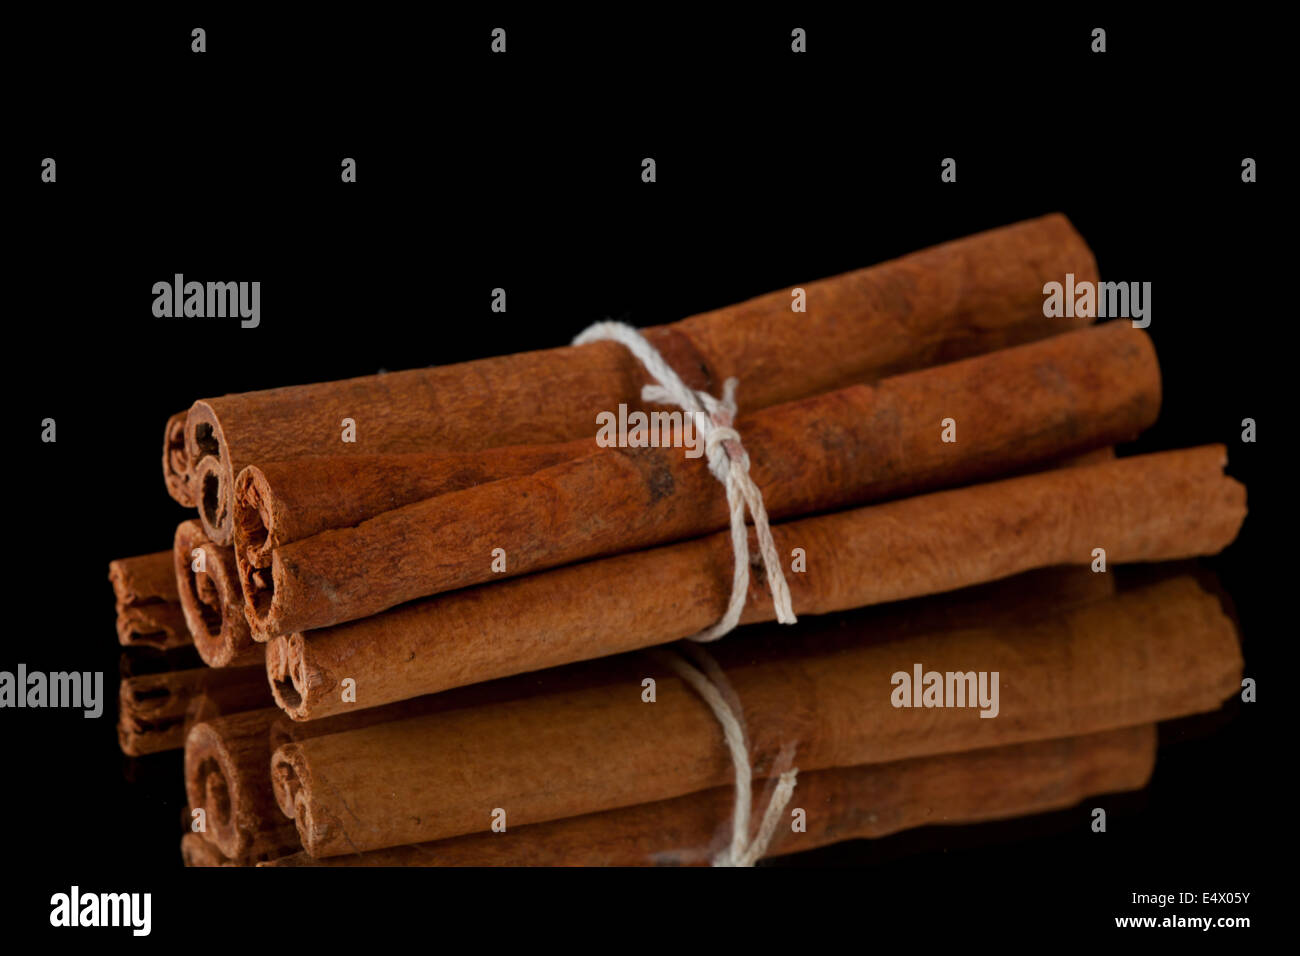 Cinnamon sticks packed together Stock Photo